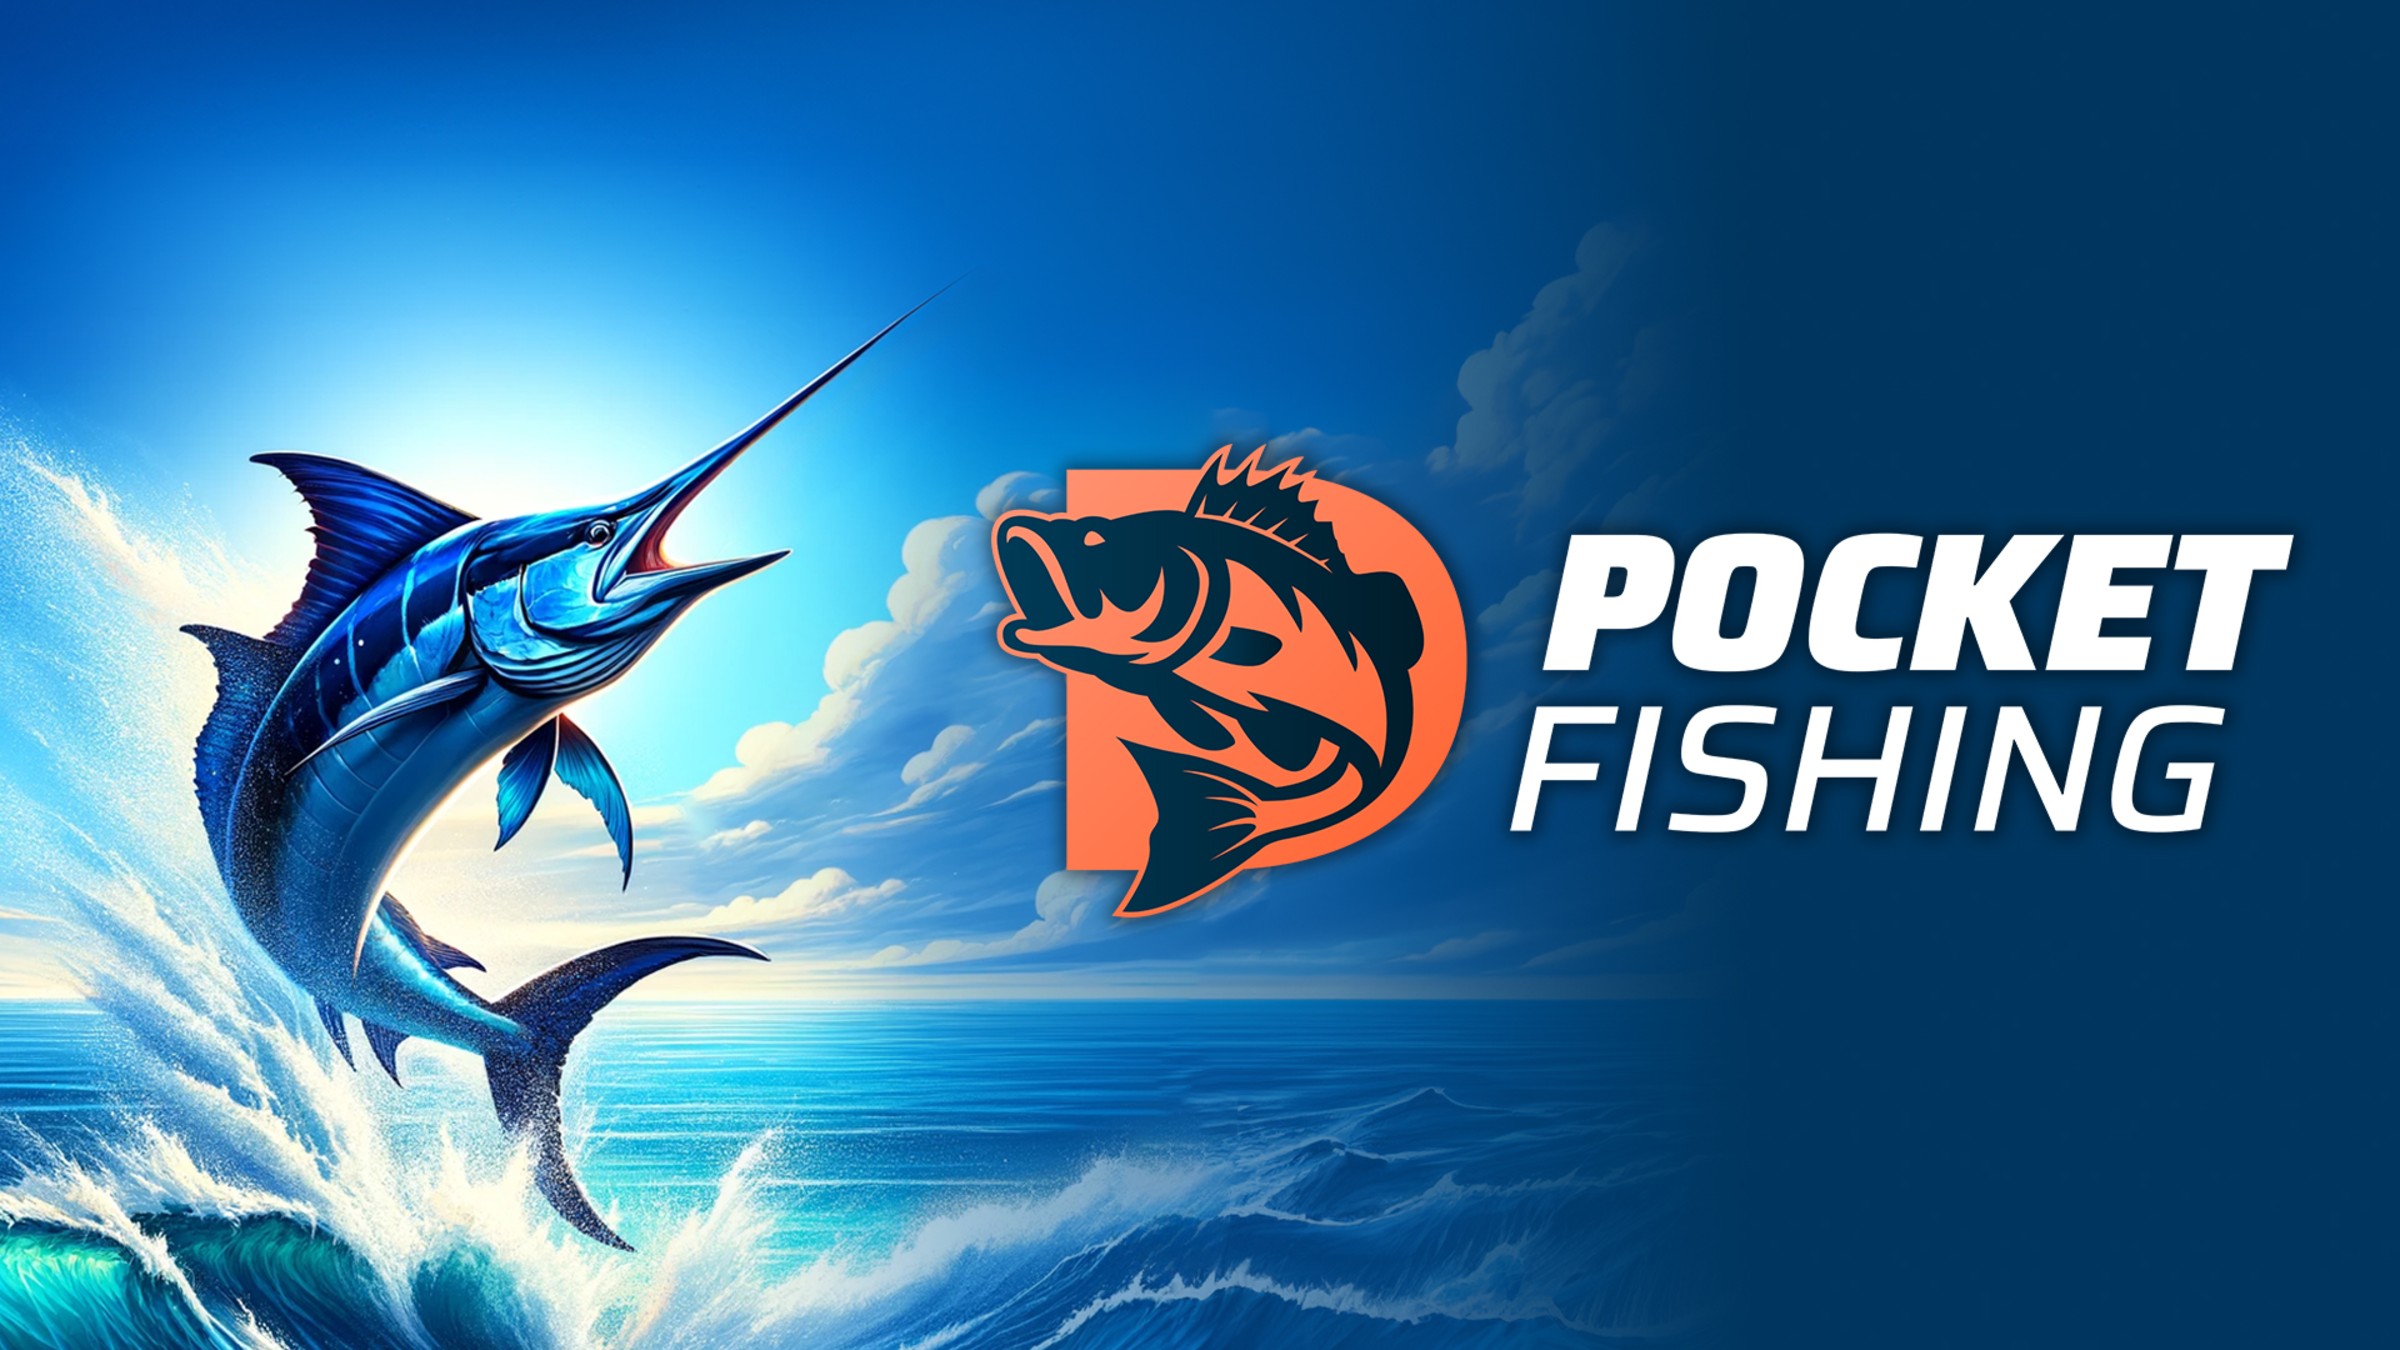 Pocket Fishing for Nintendo Switch - Nintendo Official Site for Canada